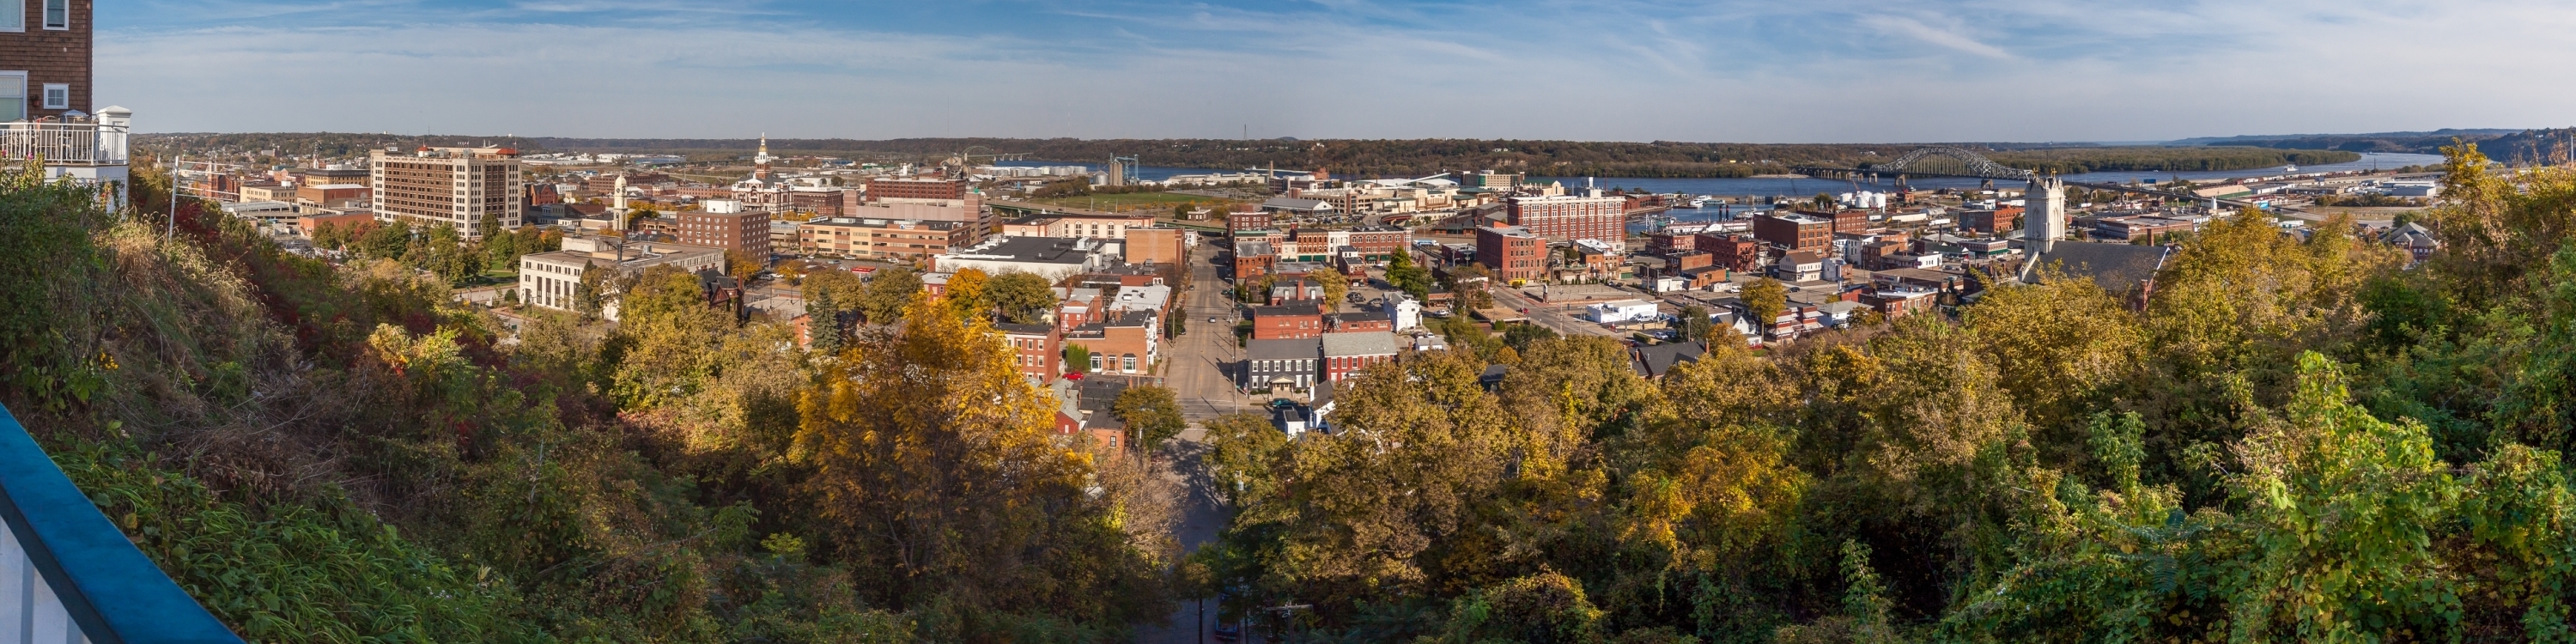 Panoramic image of the city of Dubuque with trees and buildings